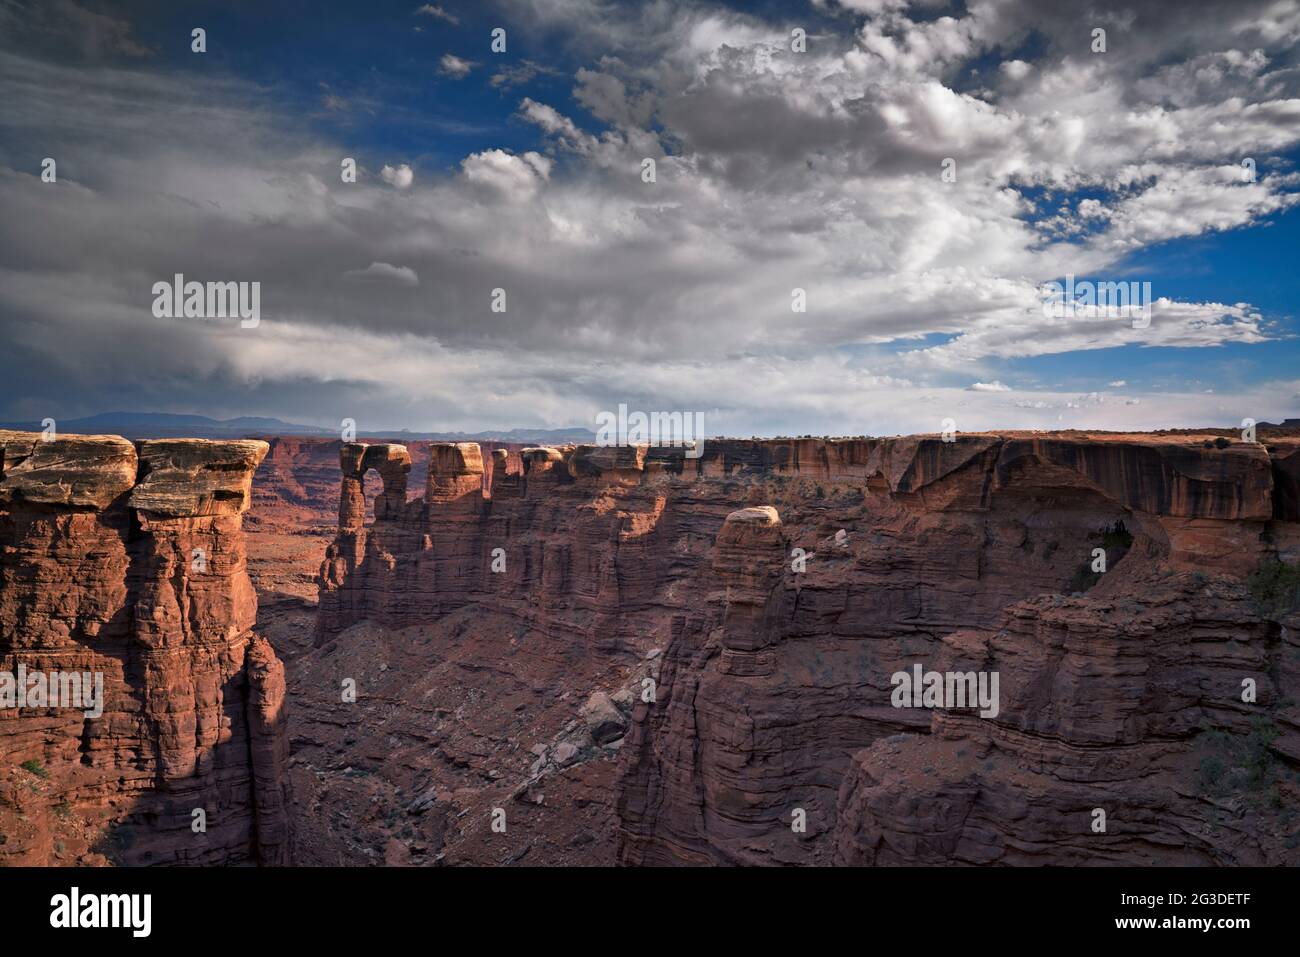 Evening light and shadows interact among the towering sandstone spires at Monument Basin along the remote White Rim Road in Utah’s Canyonlands Nationa Stock Photo